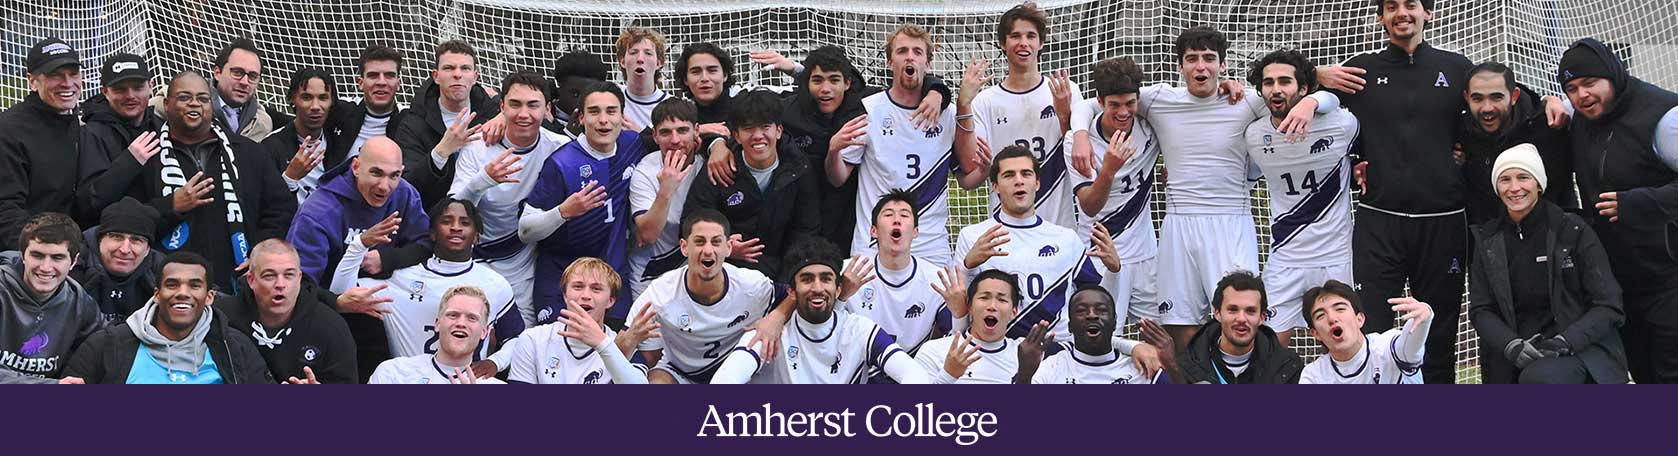 The Amherst College men's soccer team poses for a group photo.